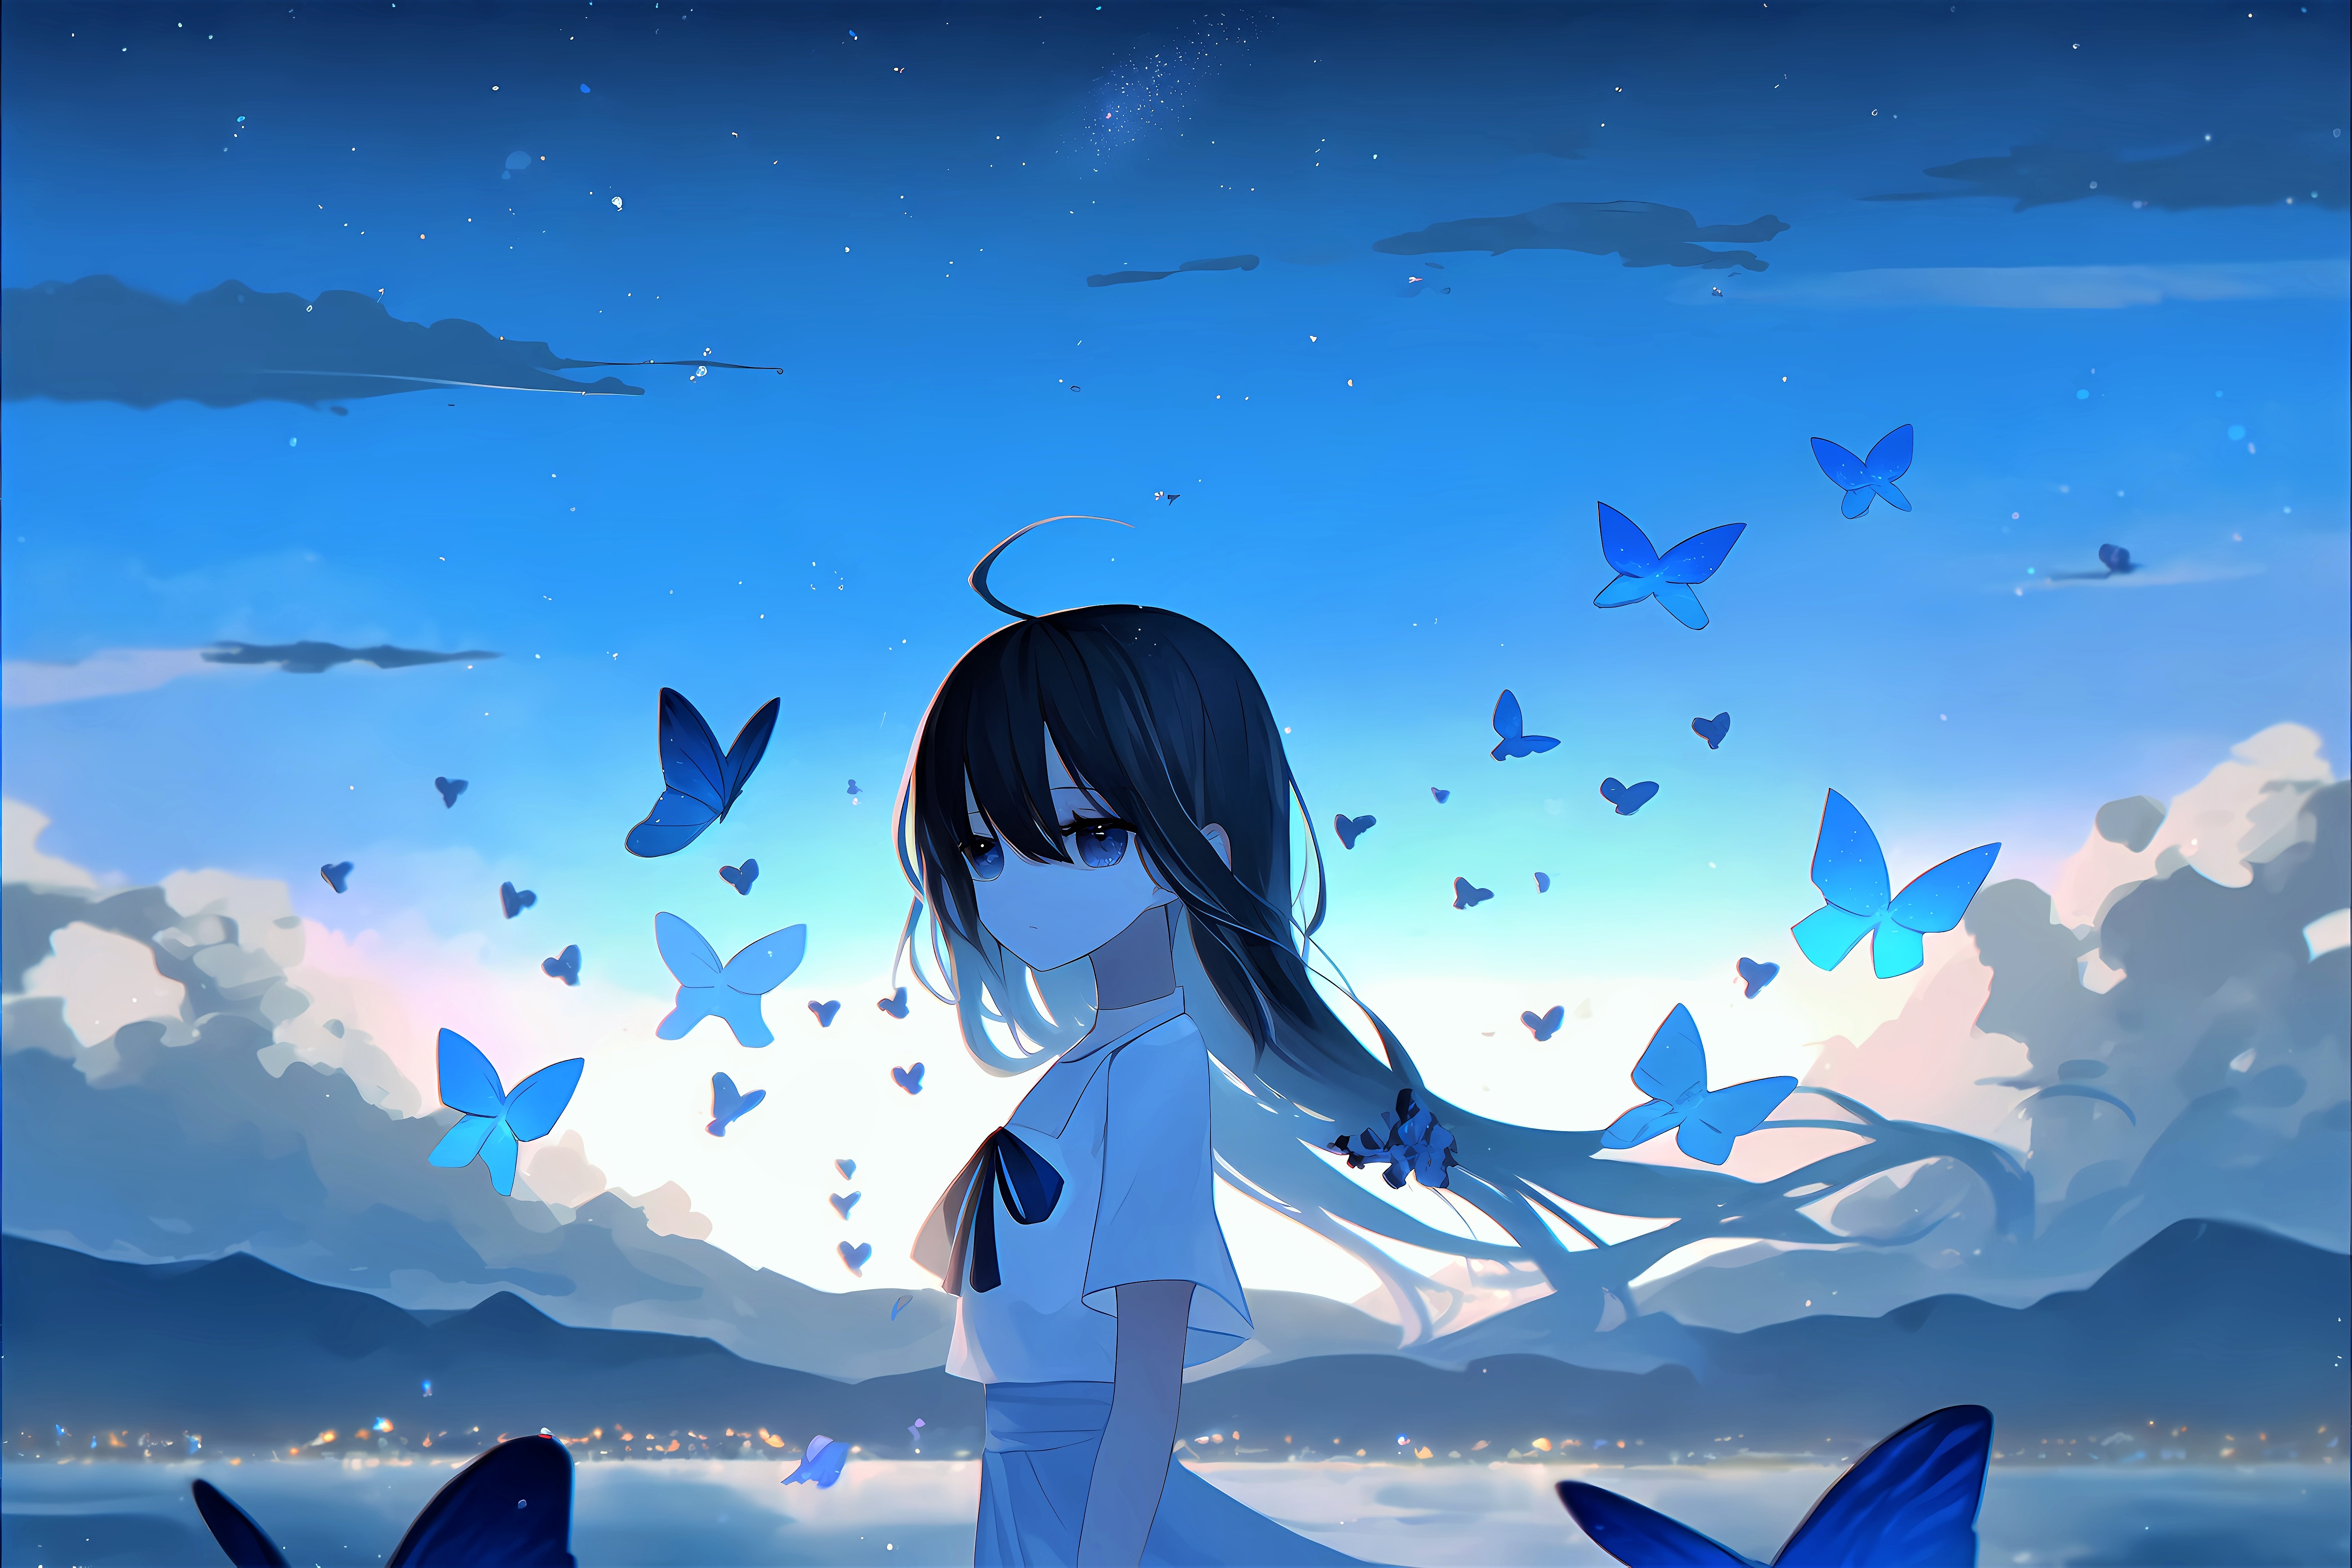 HD wallpaper, Sad Girl, Blue Background, Anime Girl, Surreal, 5K, Butterflies, Mood, Lonely